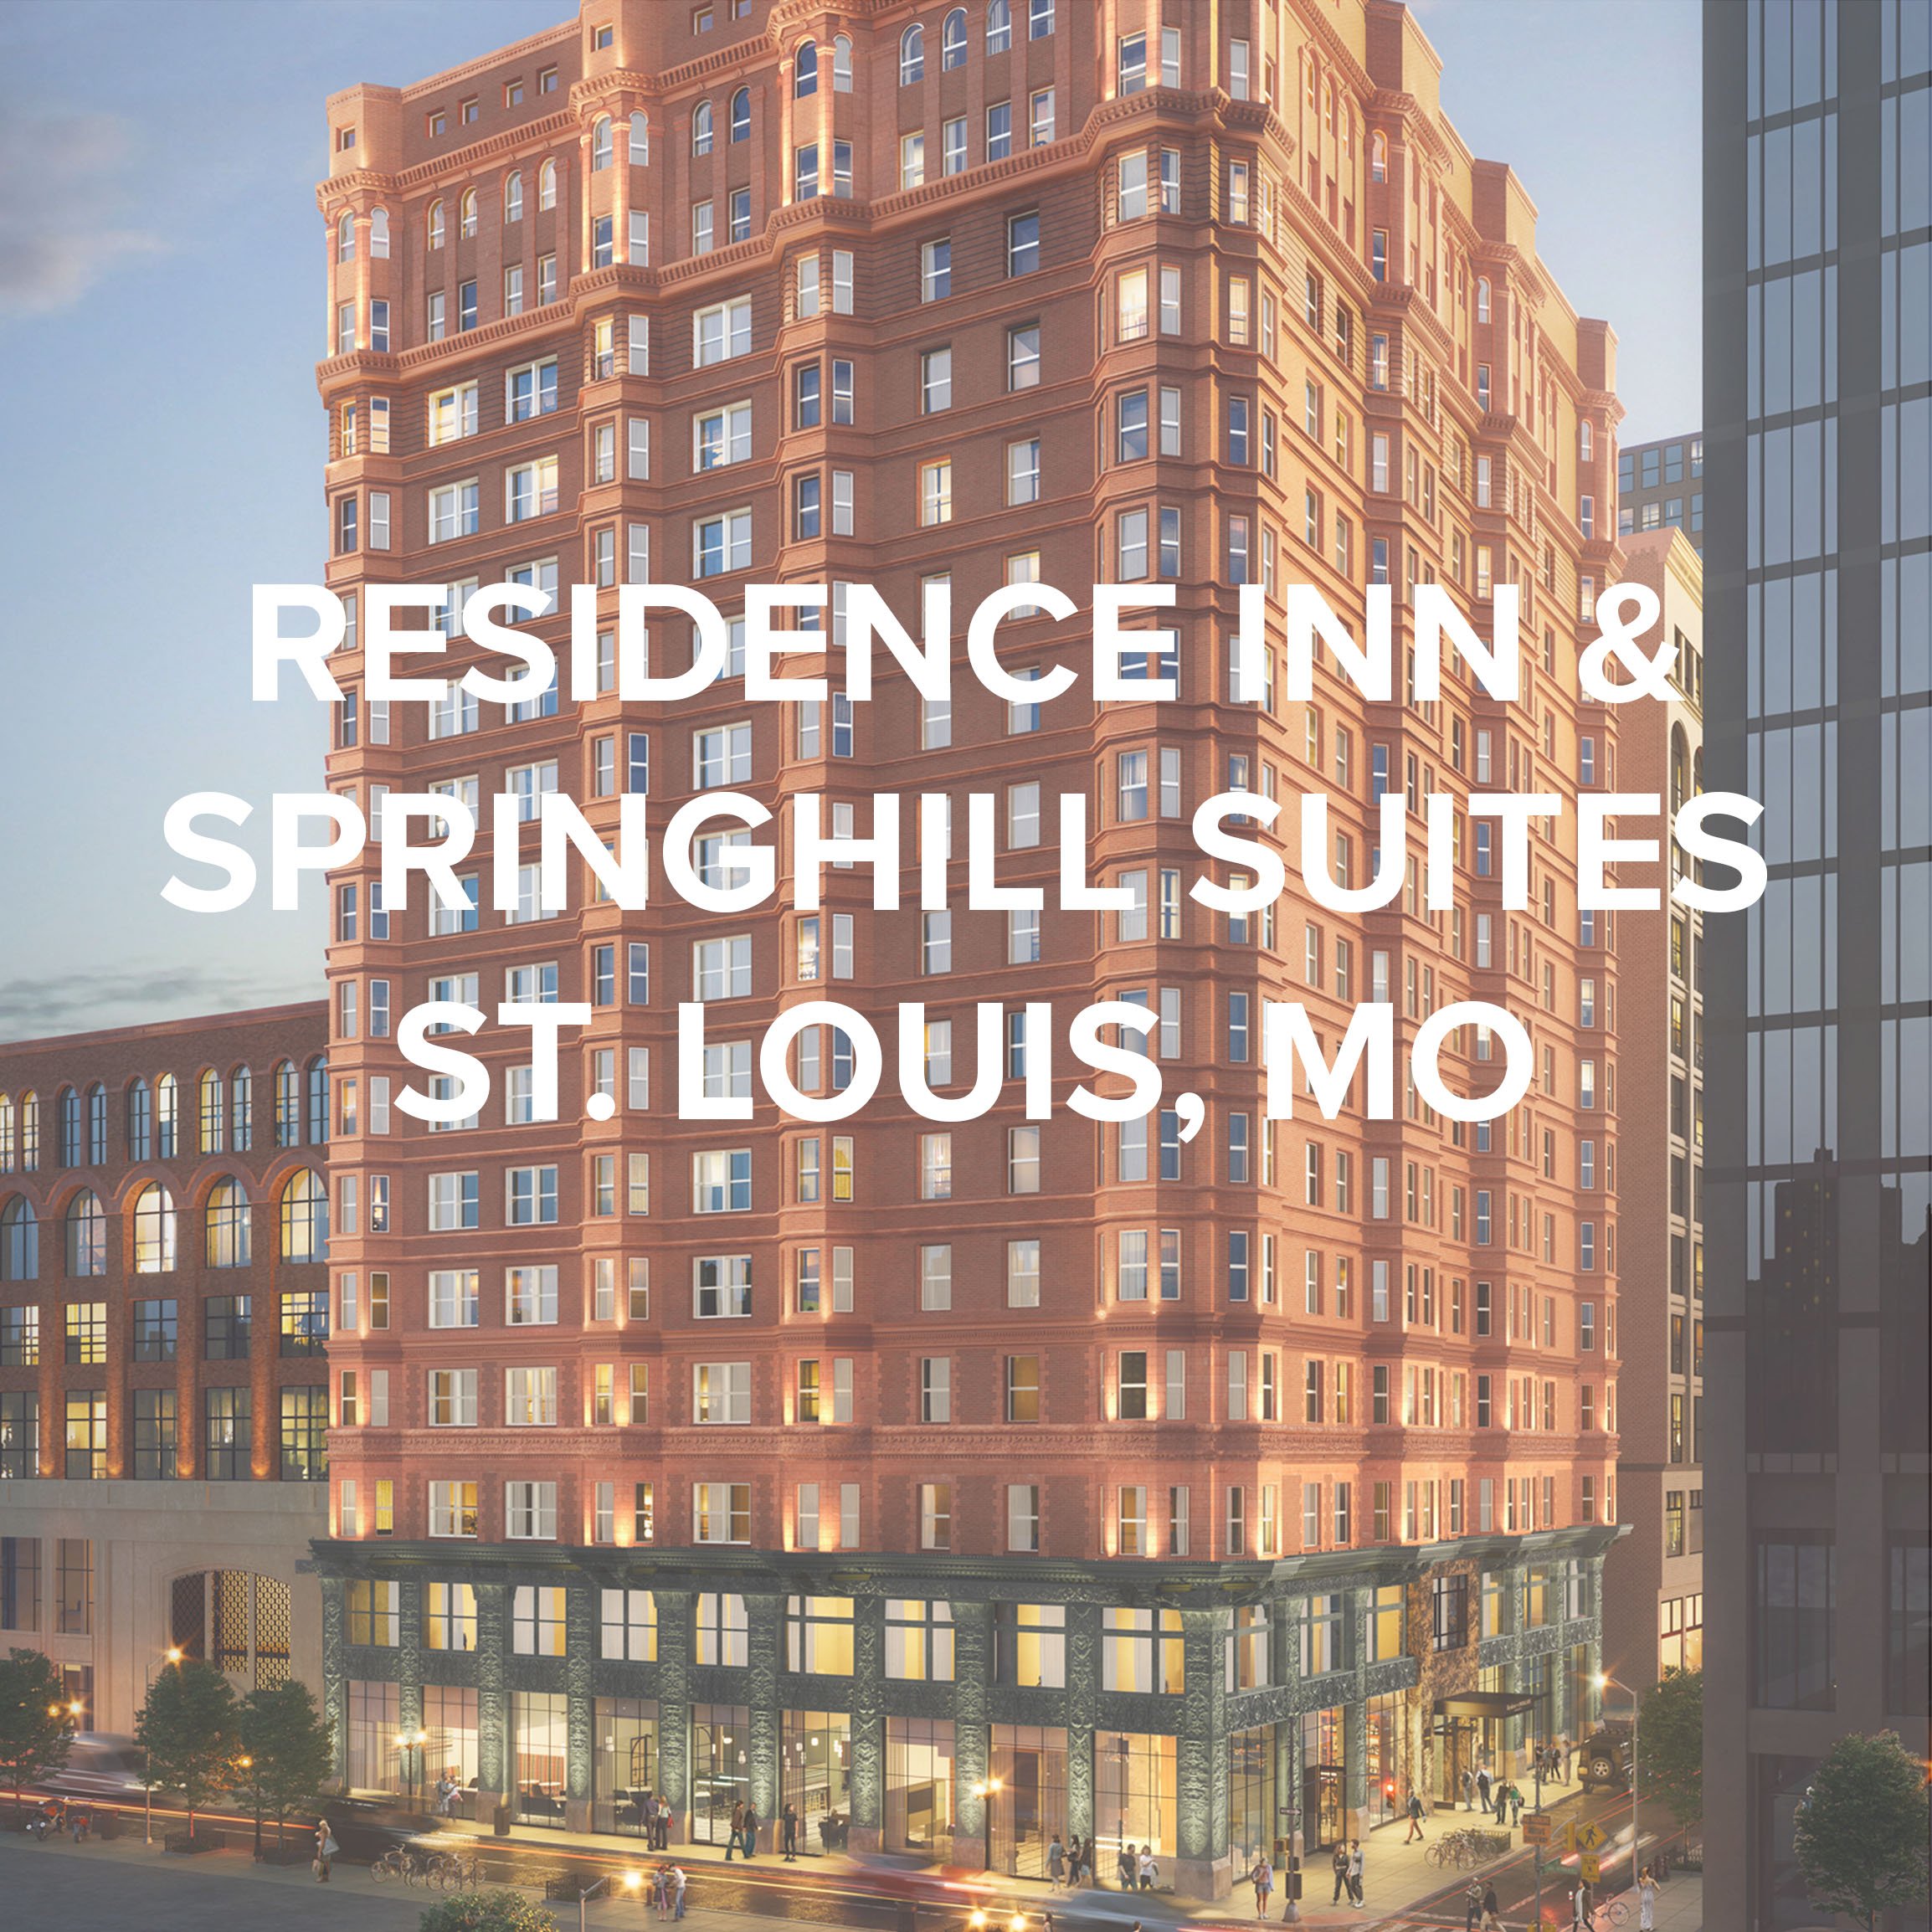 RESIDENCE INN - SPRINGHILL SUITES ST LOUIS, MO - CAMPO ARCHITECTS.jpg